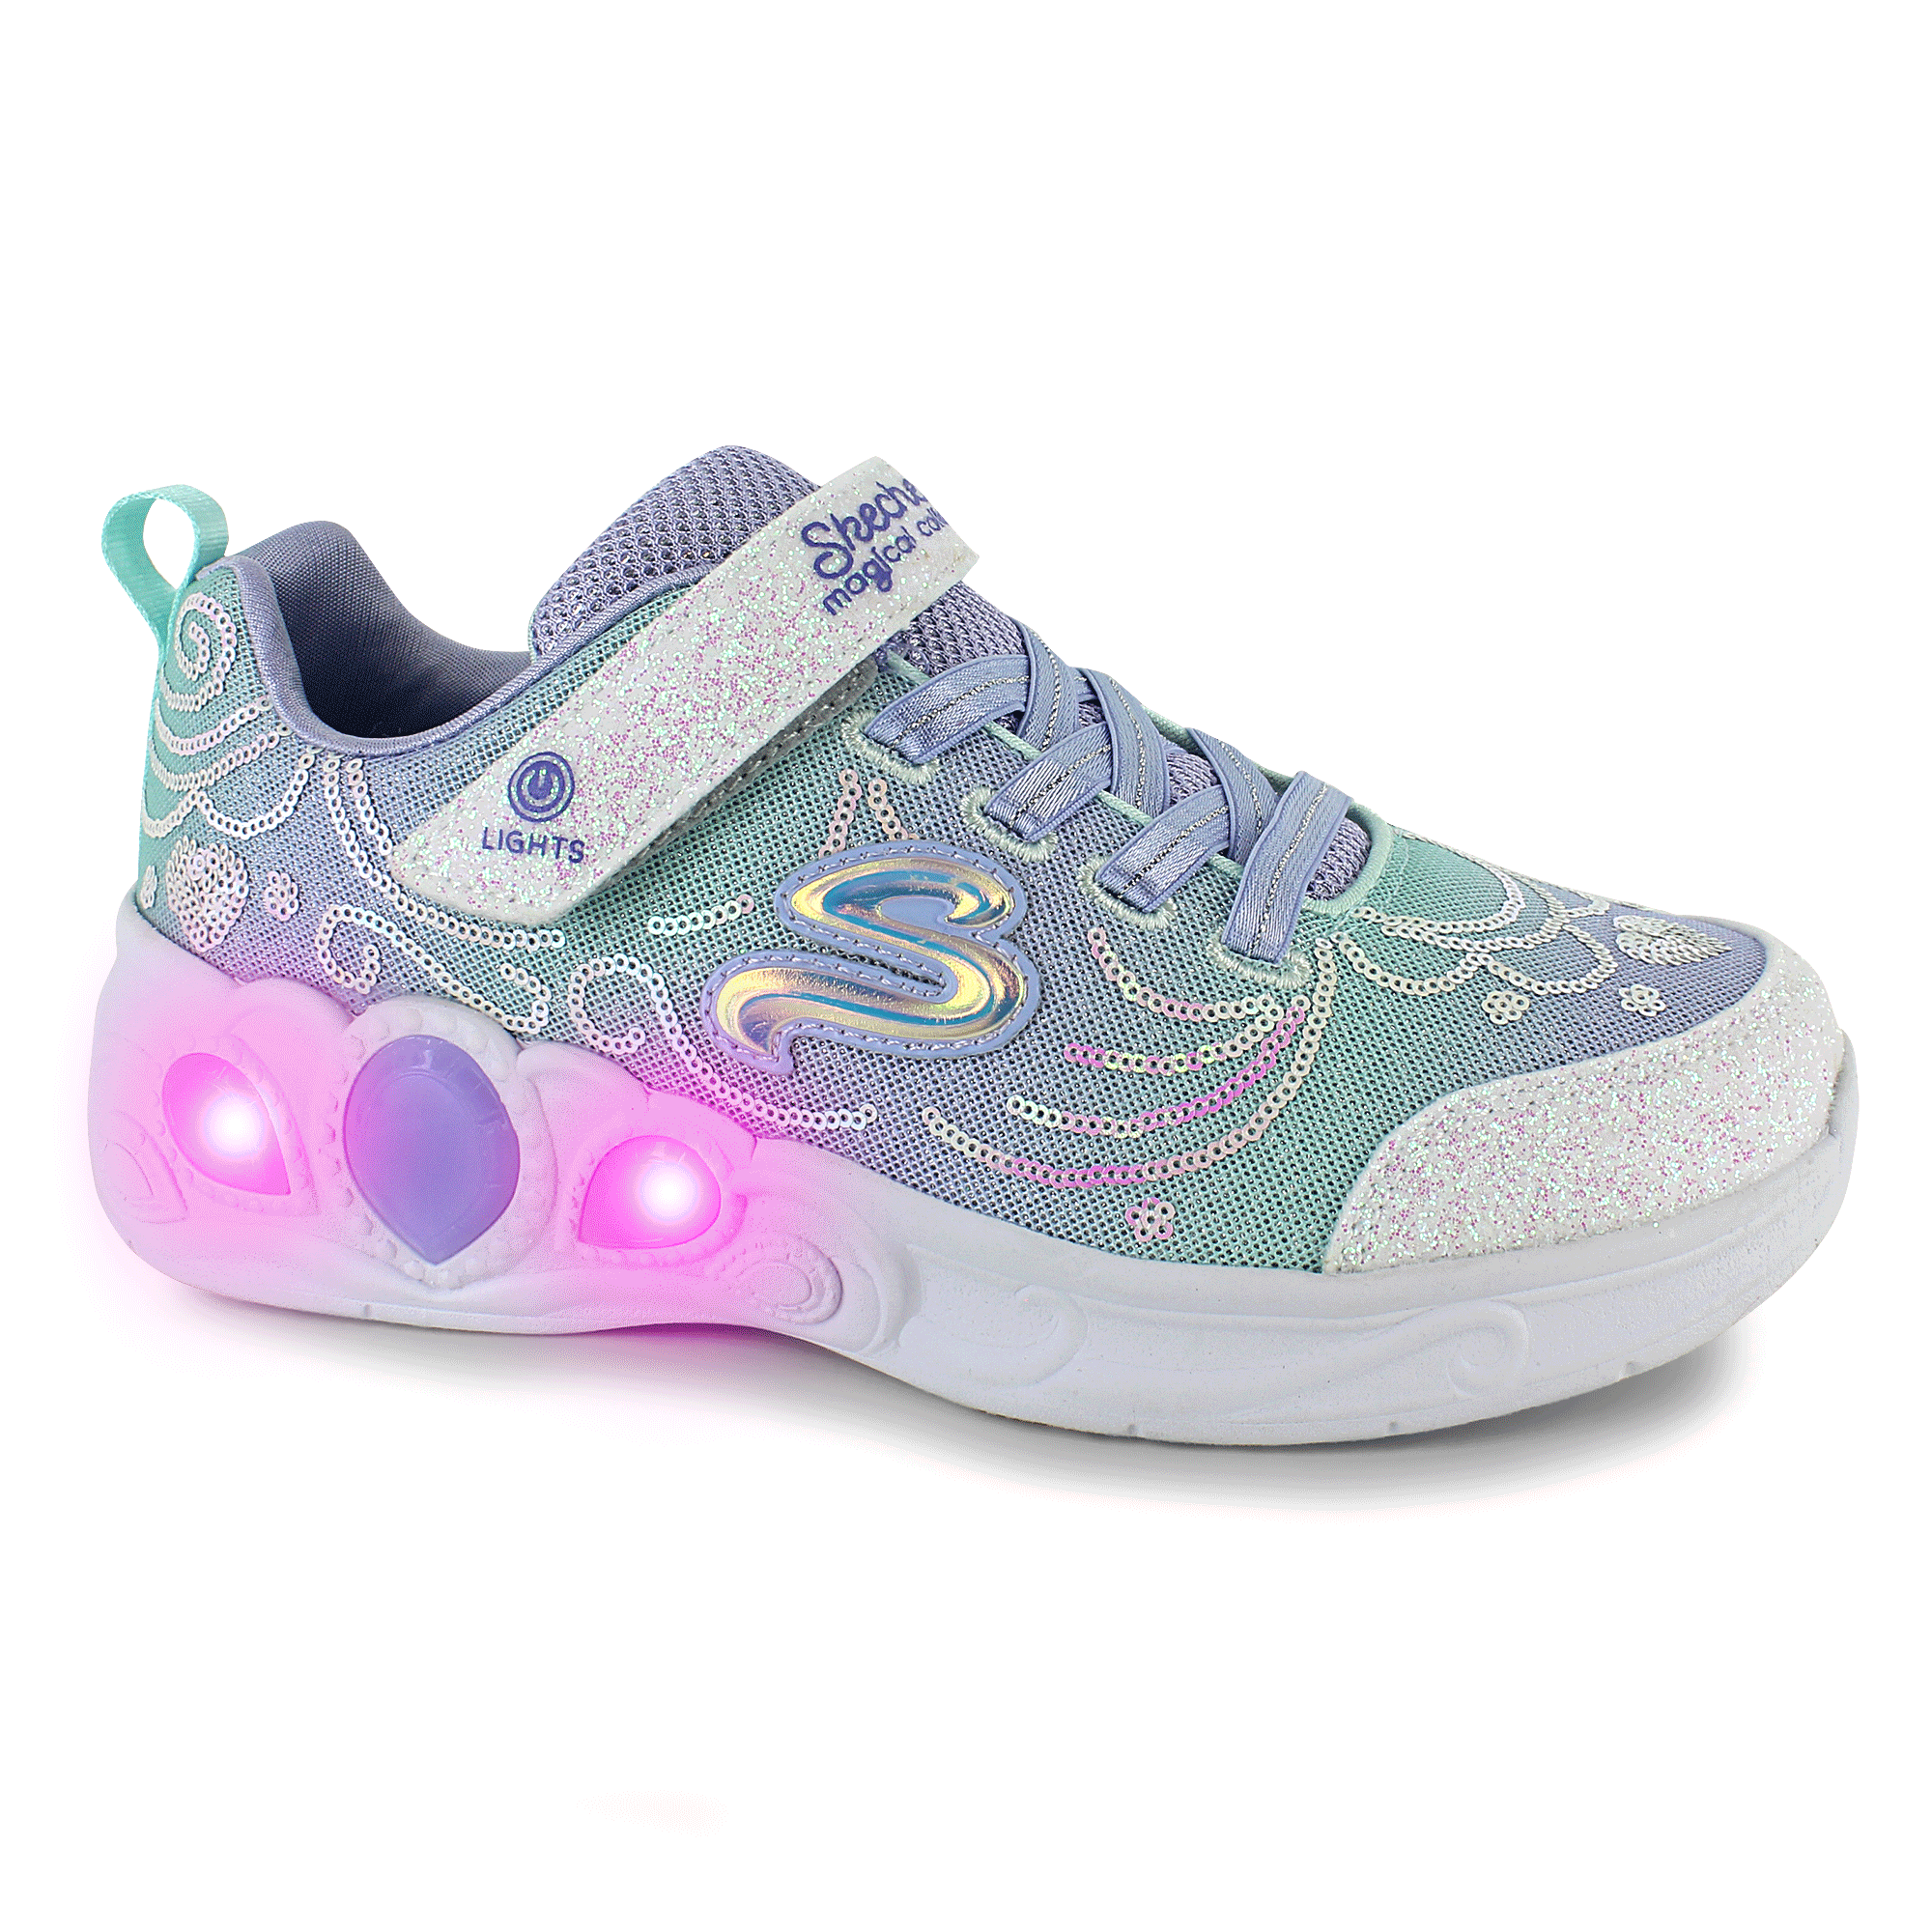 Skechers S-Lights - Princess Wishes